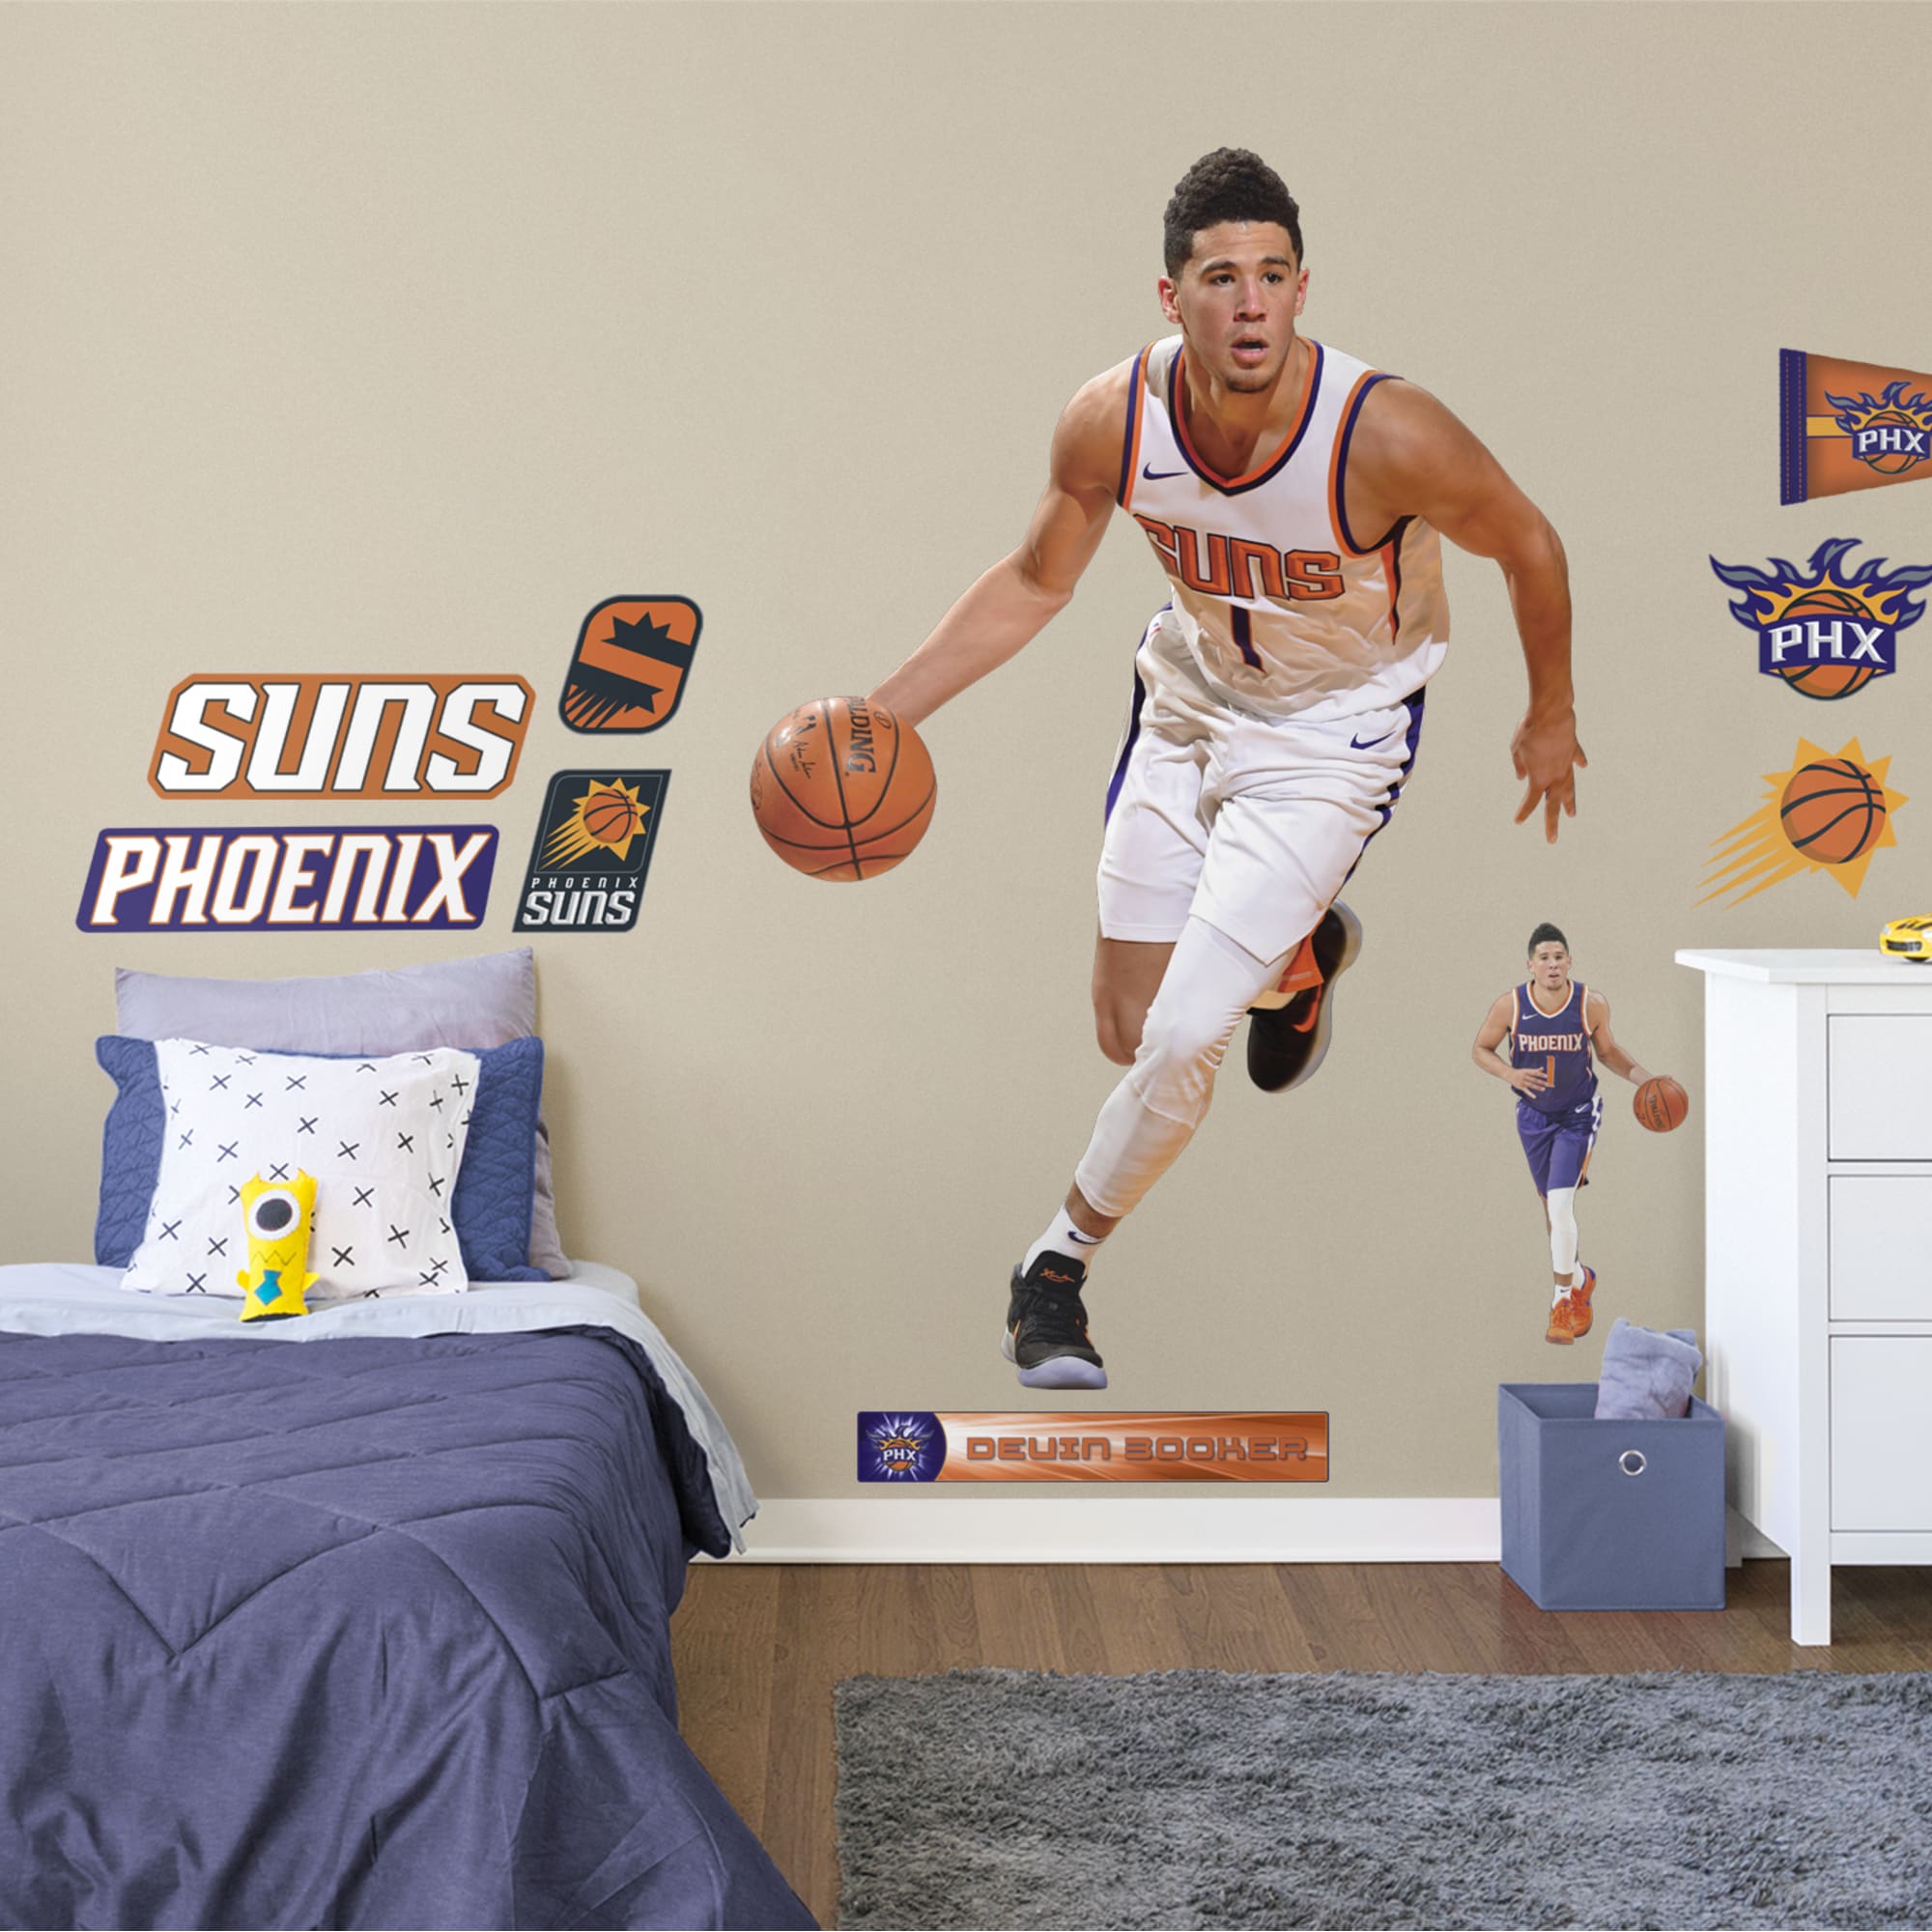 Devin Booker for Phoenix Suns - Officially Licensed NBA Removable Wall Decal Life-Size Athlete + 10 Decals (53"W x 78"H) by Fath